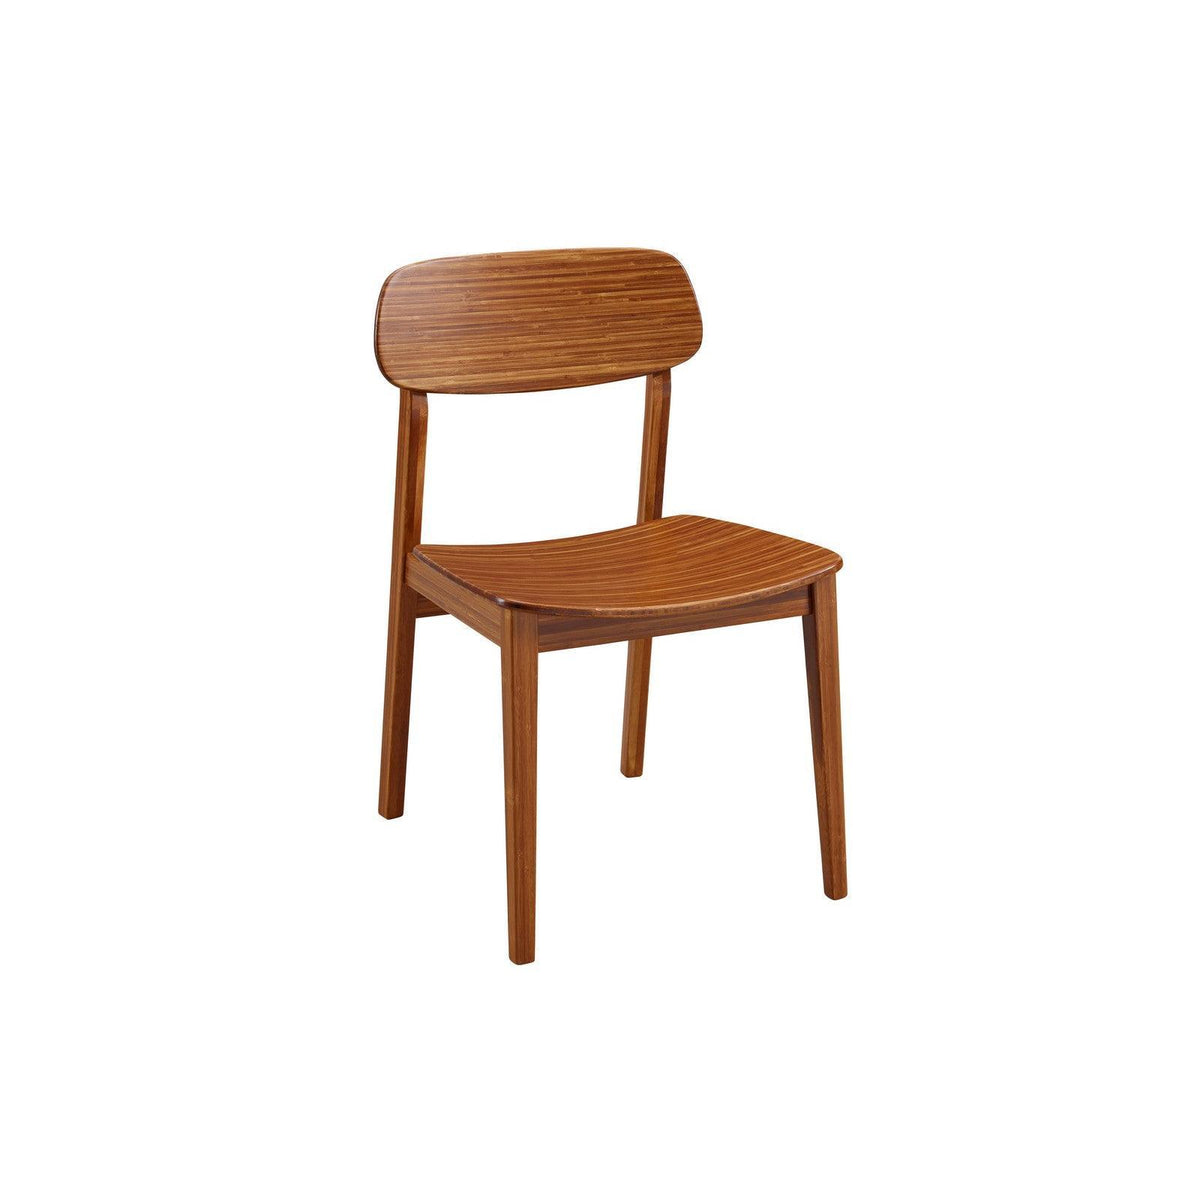 Greenington Currant Chair - Boxed set of 2, Amber - G0023AM - 1